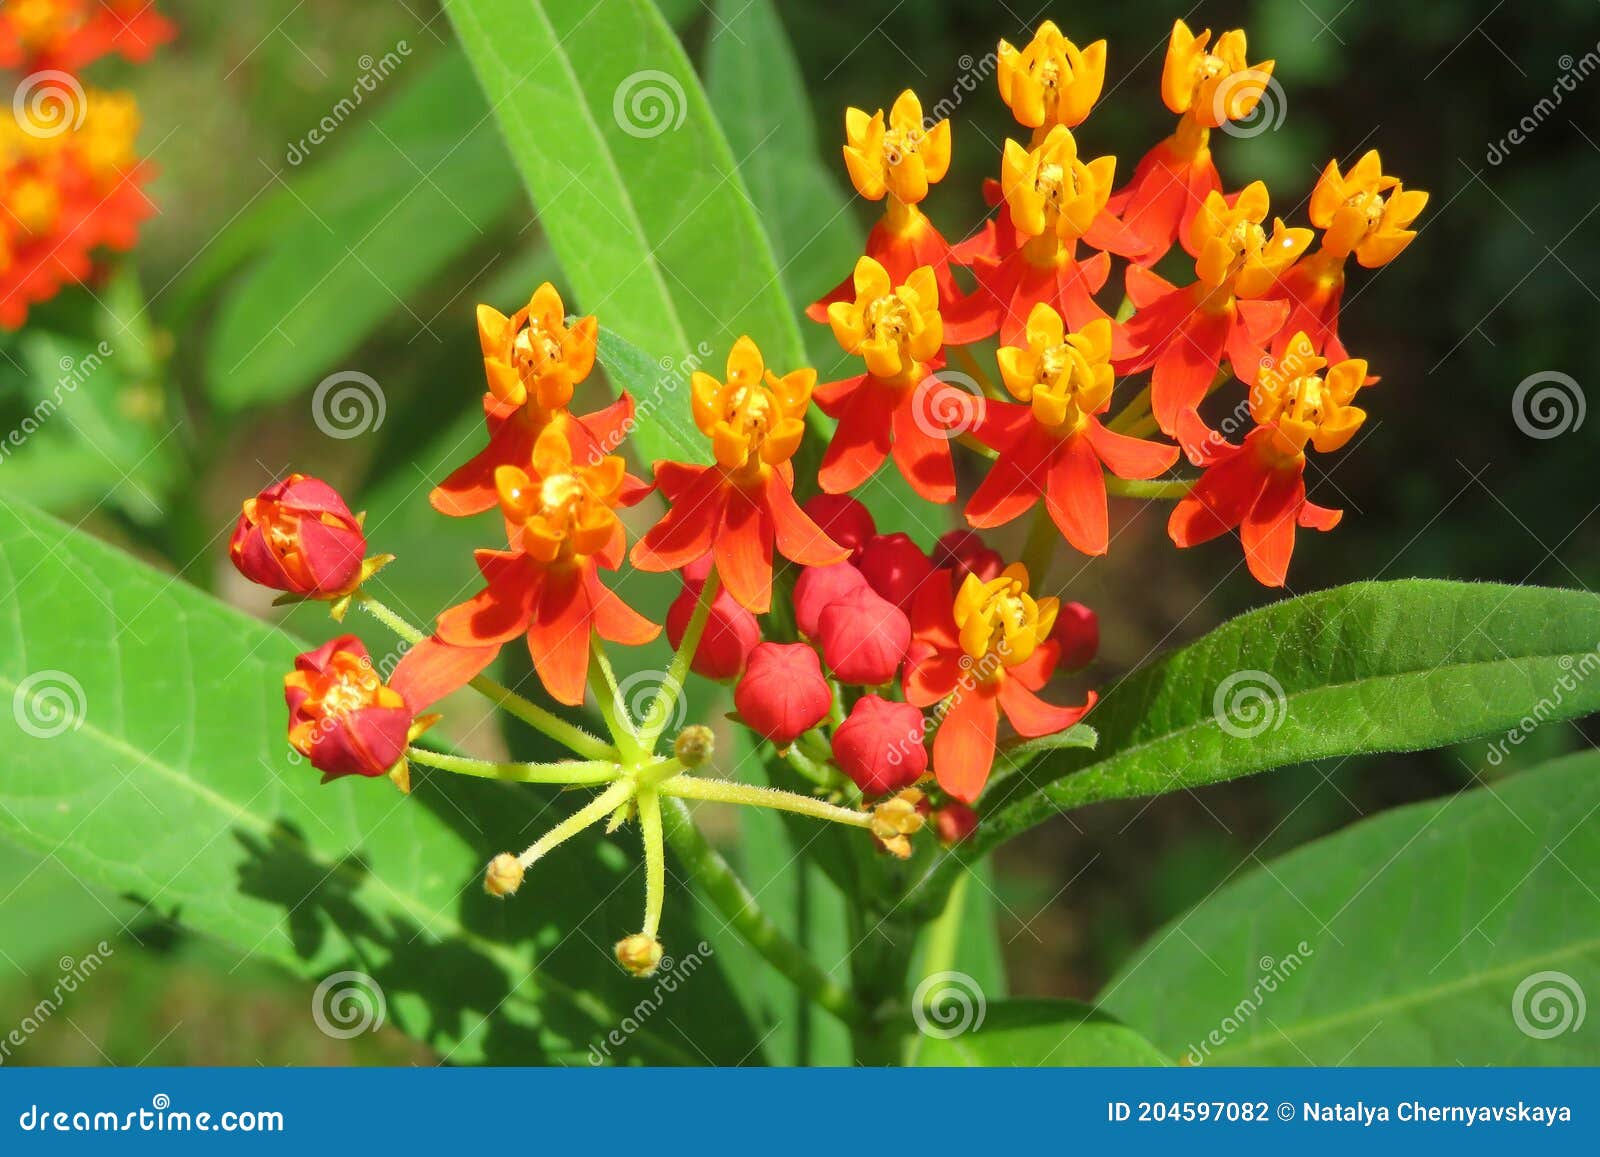 tropical asclepias flowers in the garden